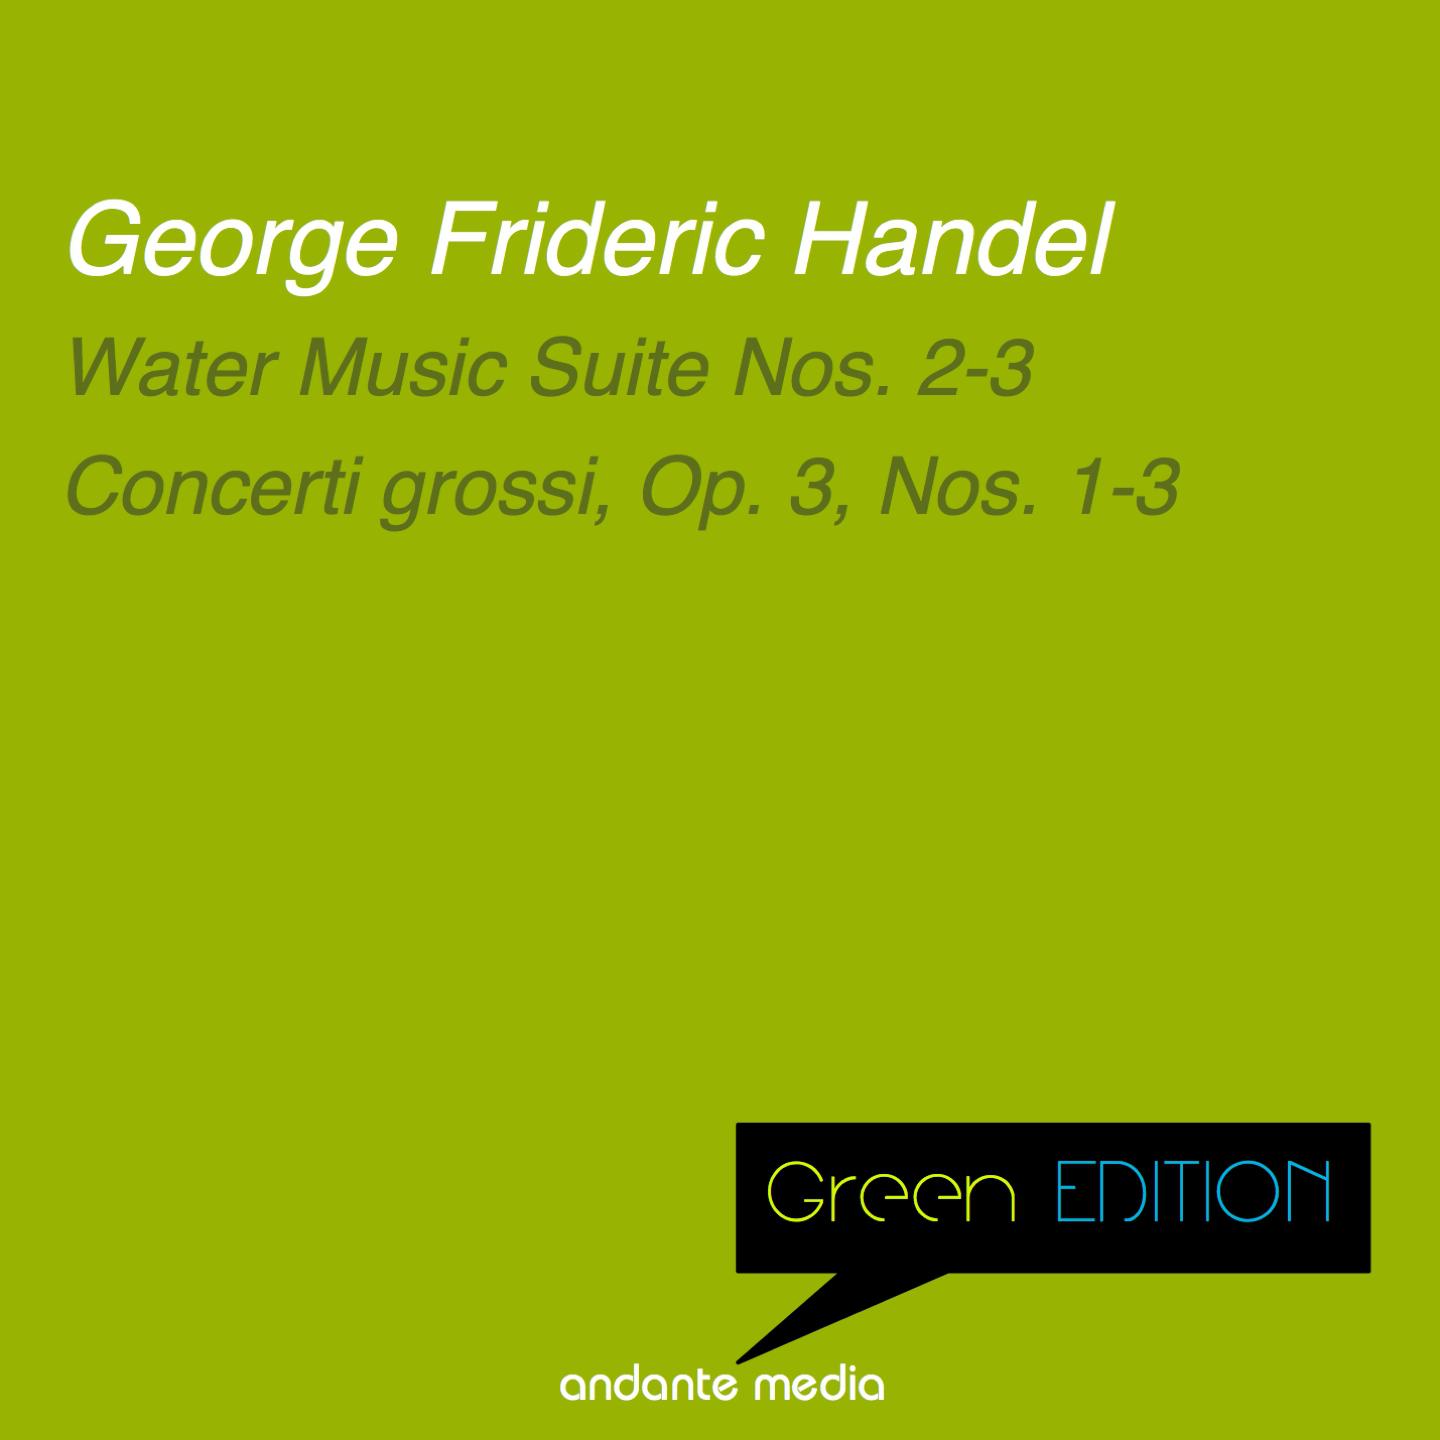 Water Music Suite No. 3 in G Major, HWV 350: Gigue 2